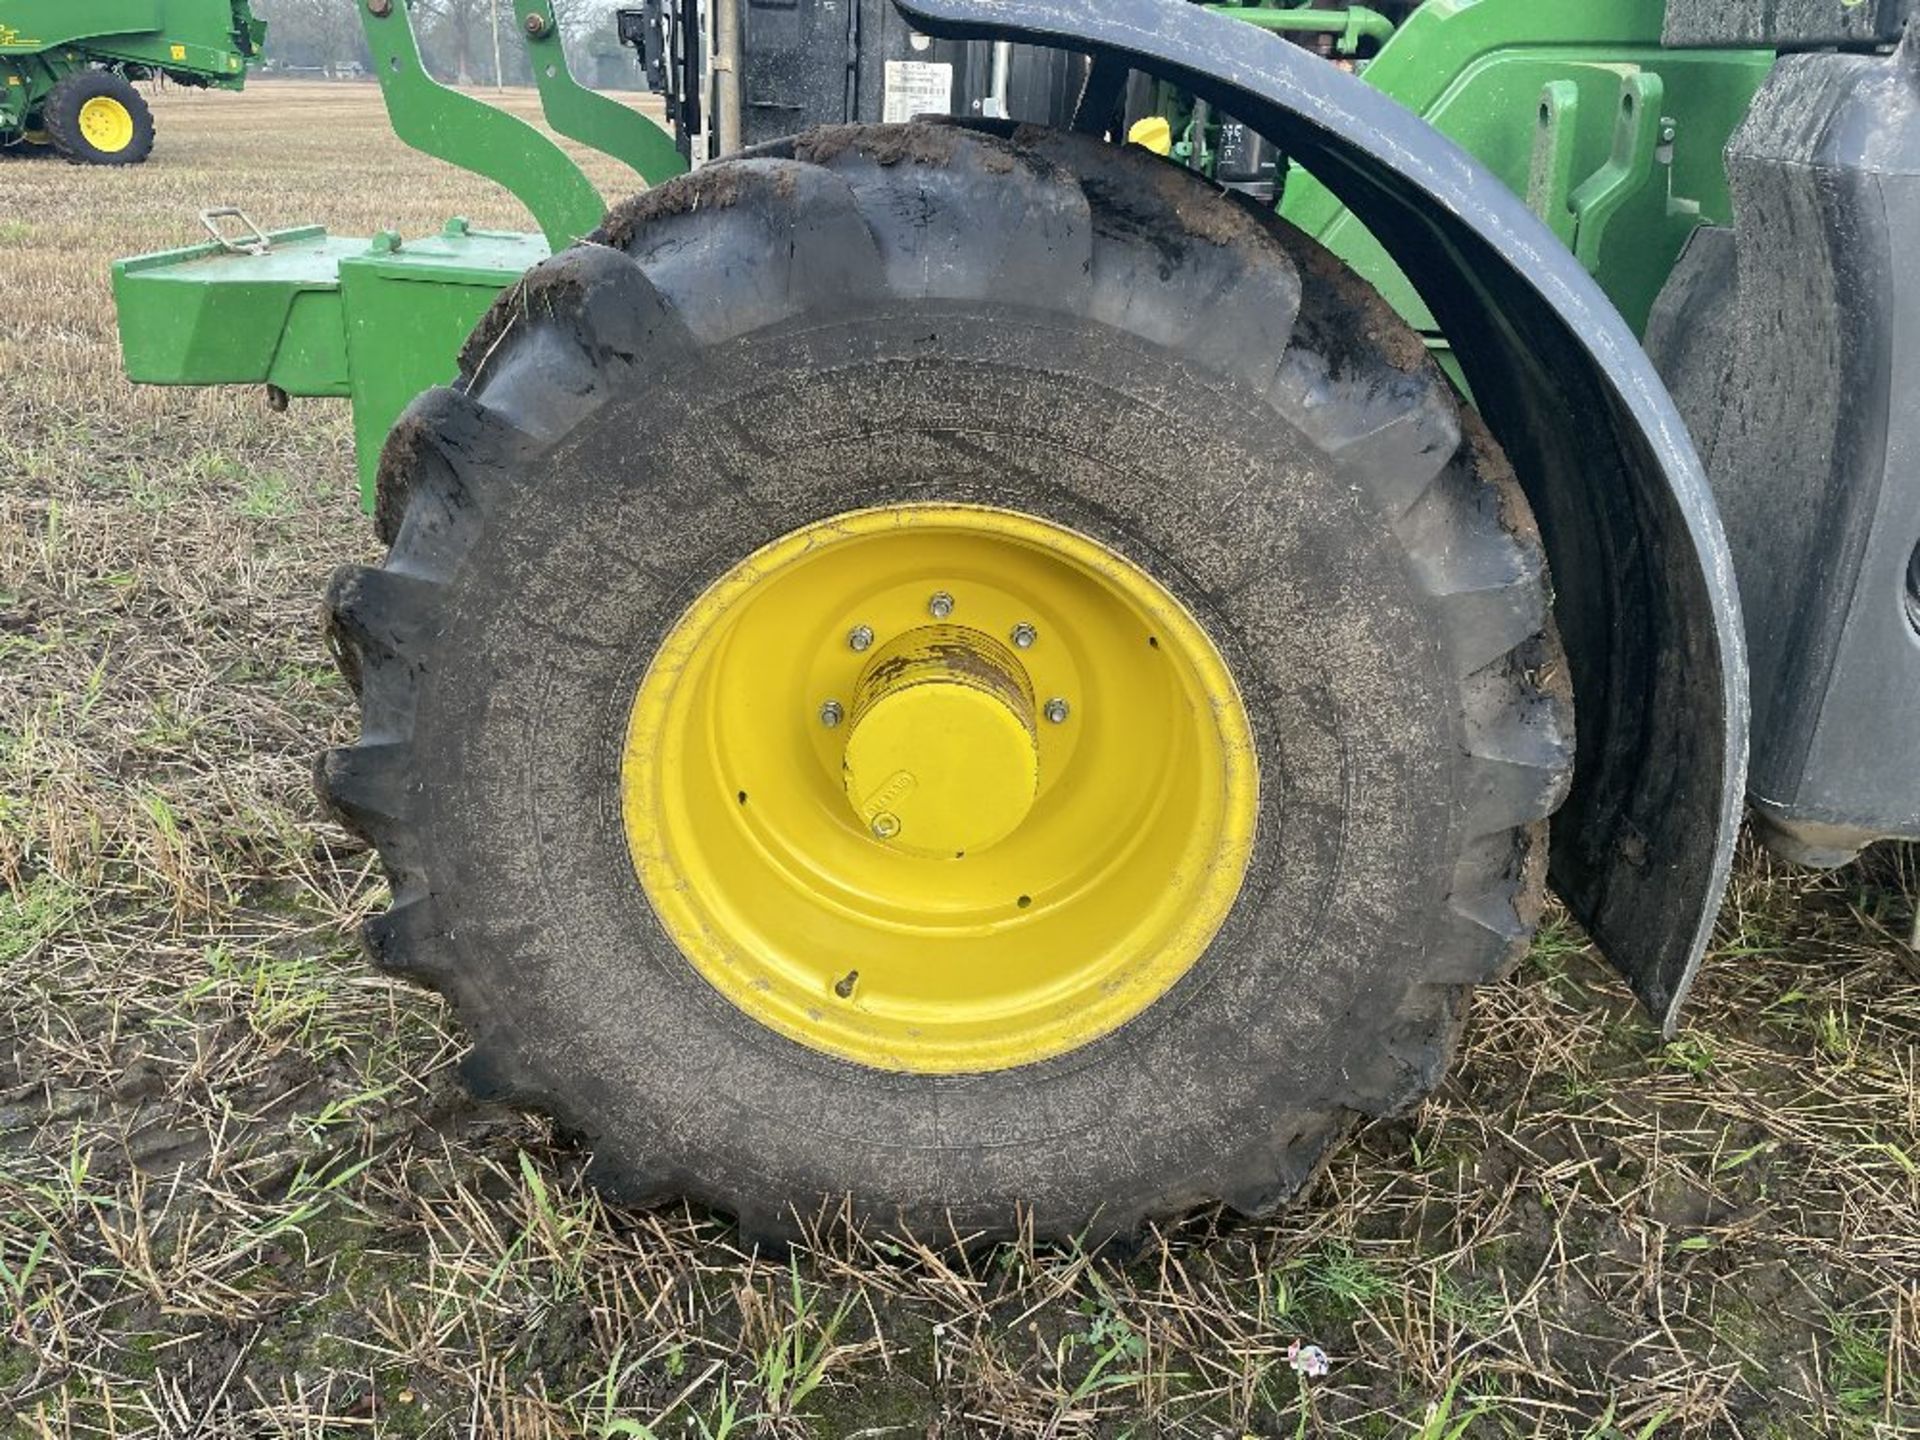 2018 John Deere 6130R 4wd Tractor, approx 1080 hours, Reg No. - Image 14 of 20